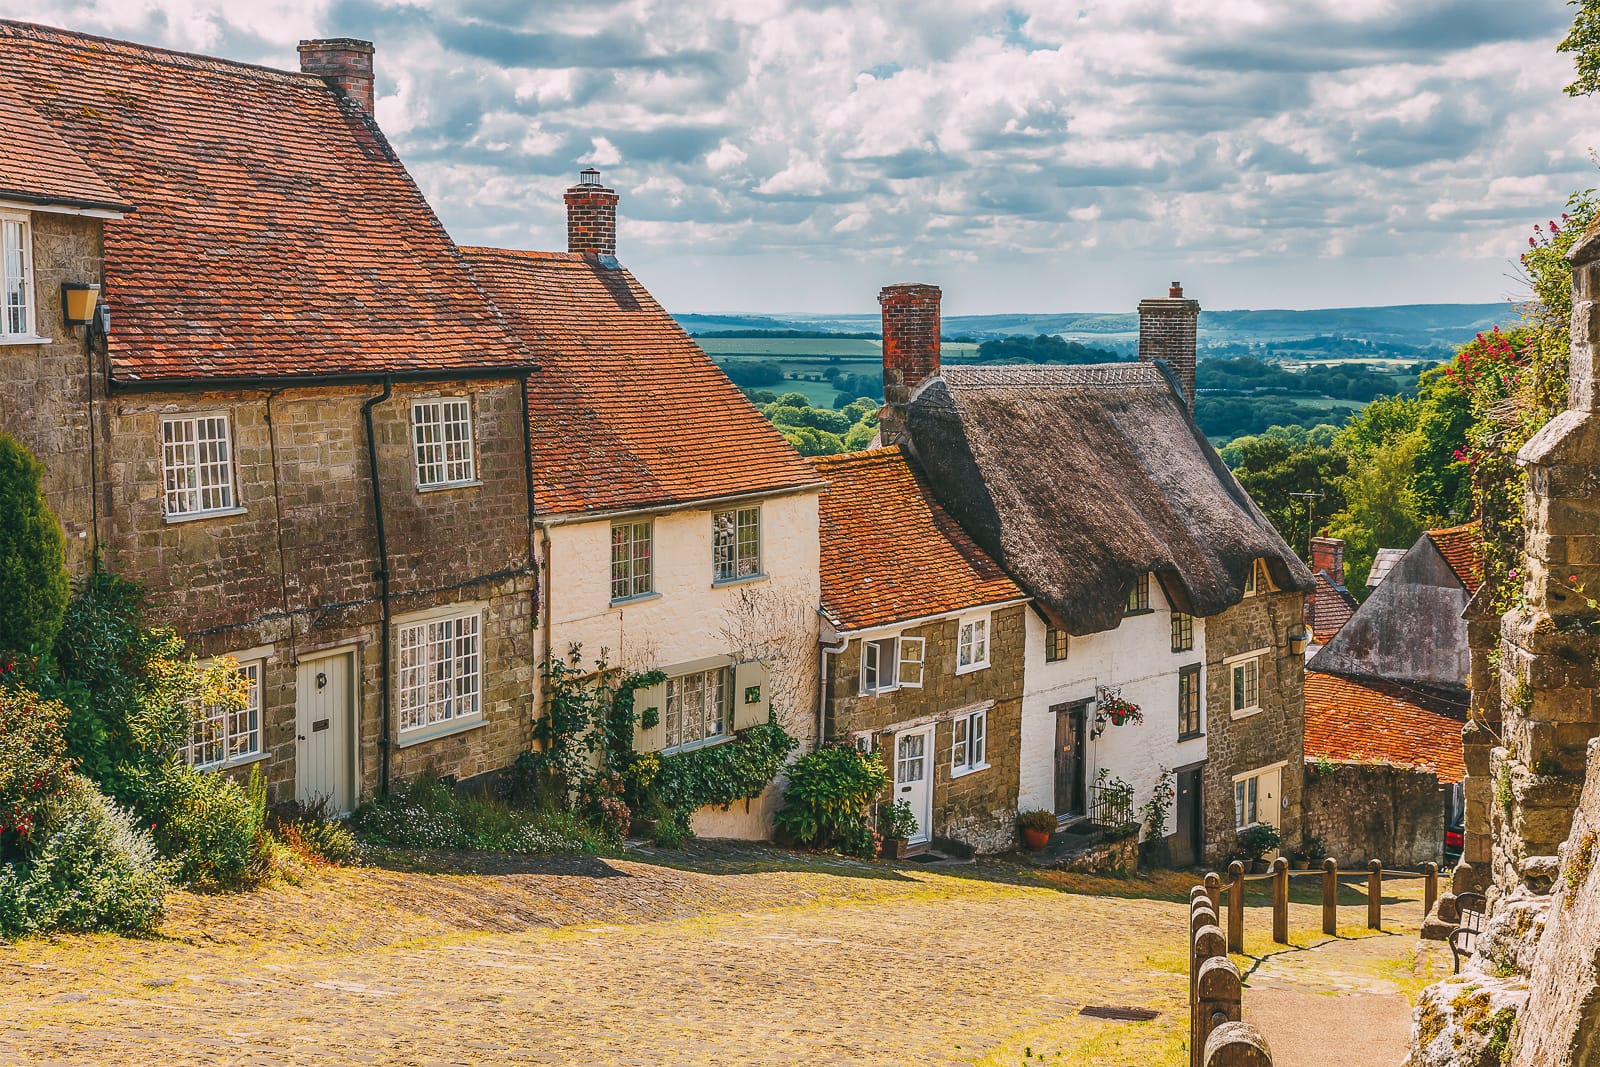 17 Beautiful Towns To Visit In The UK - Hand Luggage Only - Travel